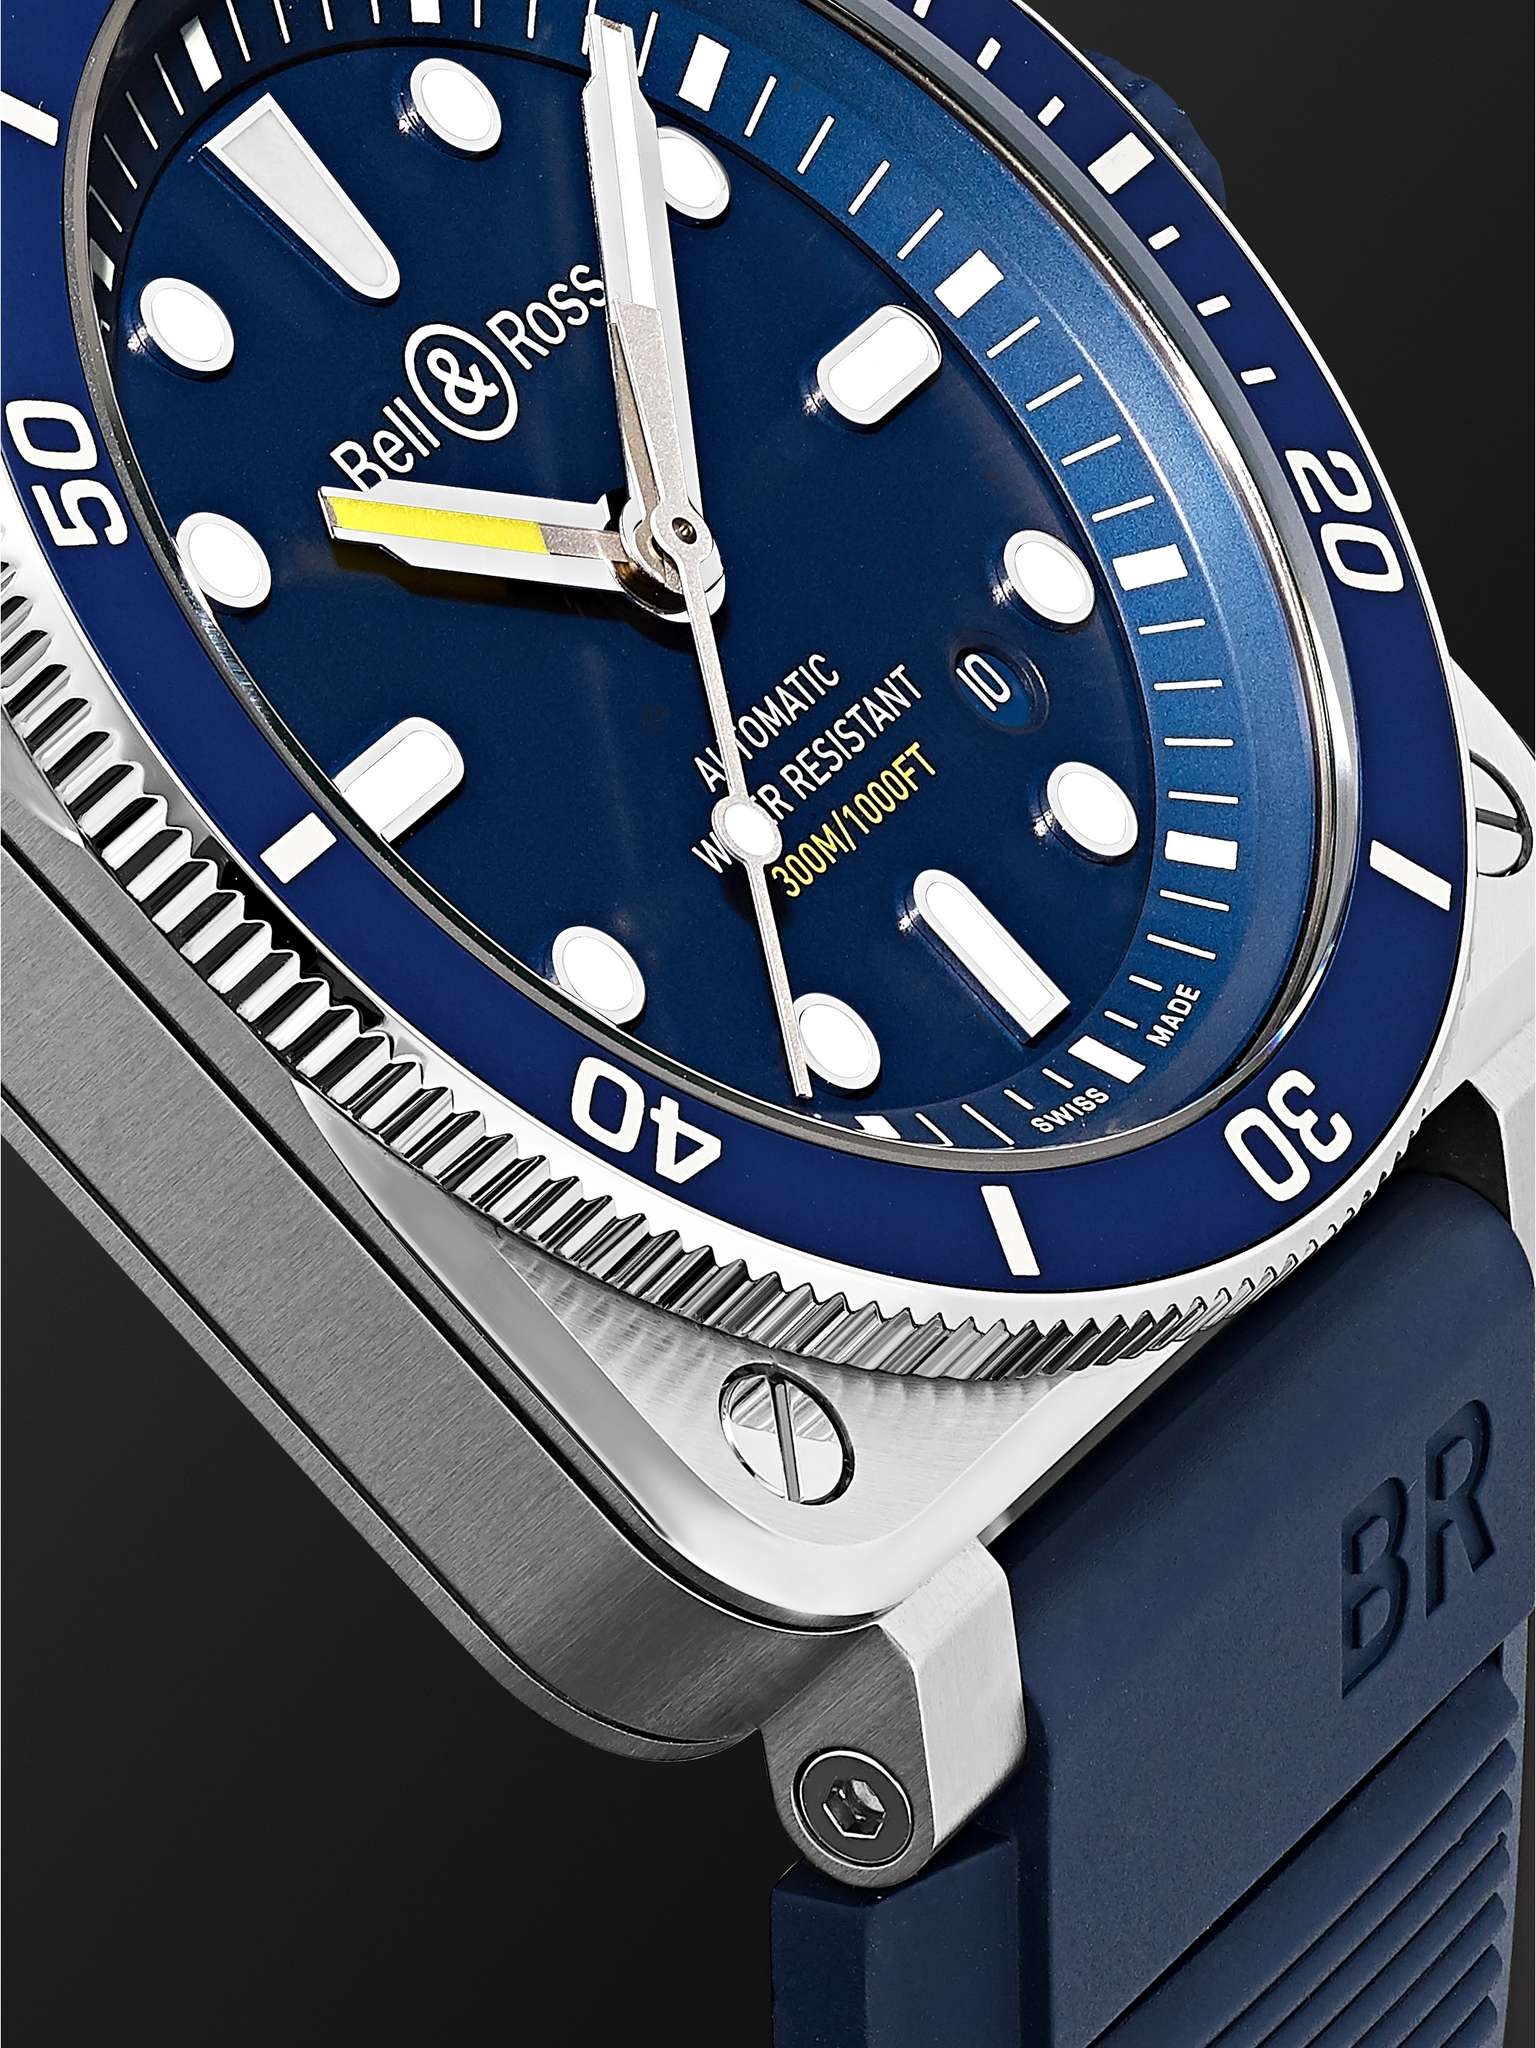 BR 03-92 Diver Blue Automatic 42mm Stainless Steel and Rubber Watch, Ref. No. BR0392-D-BU-ST/SRB - 3